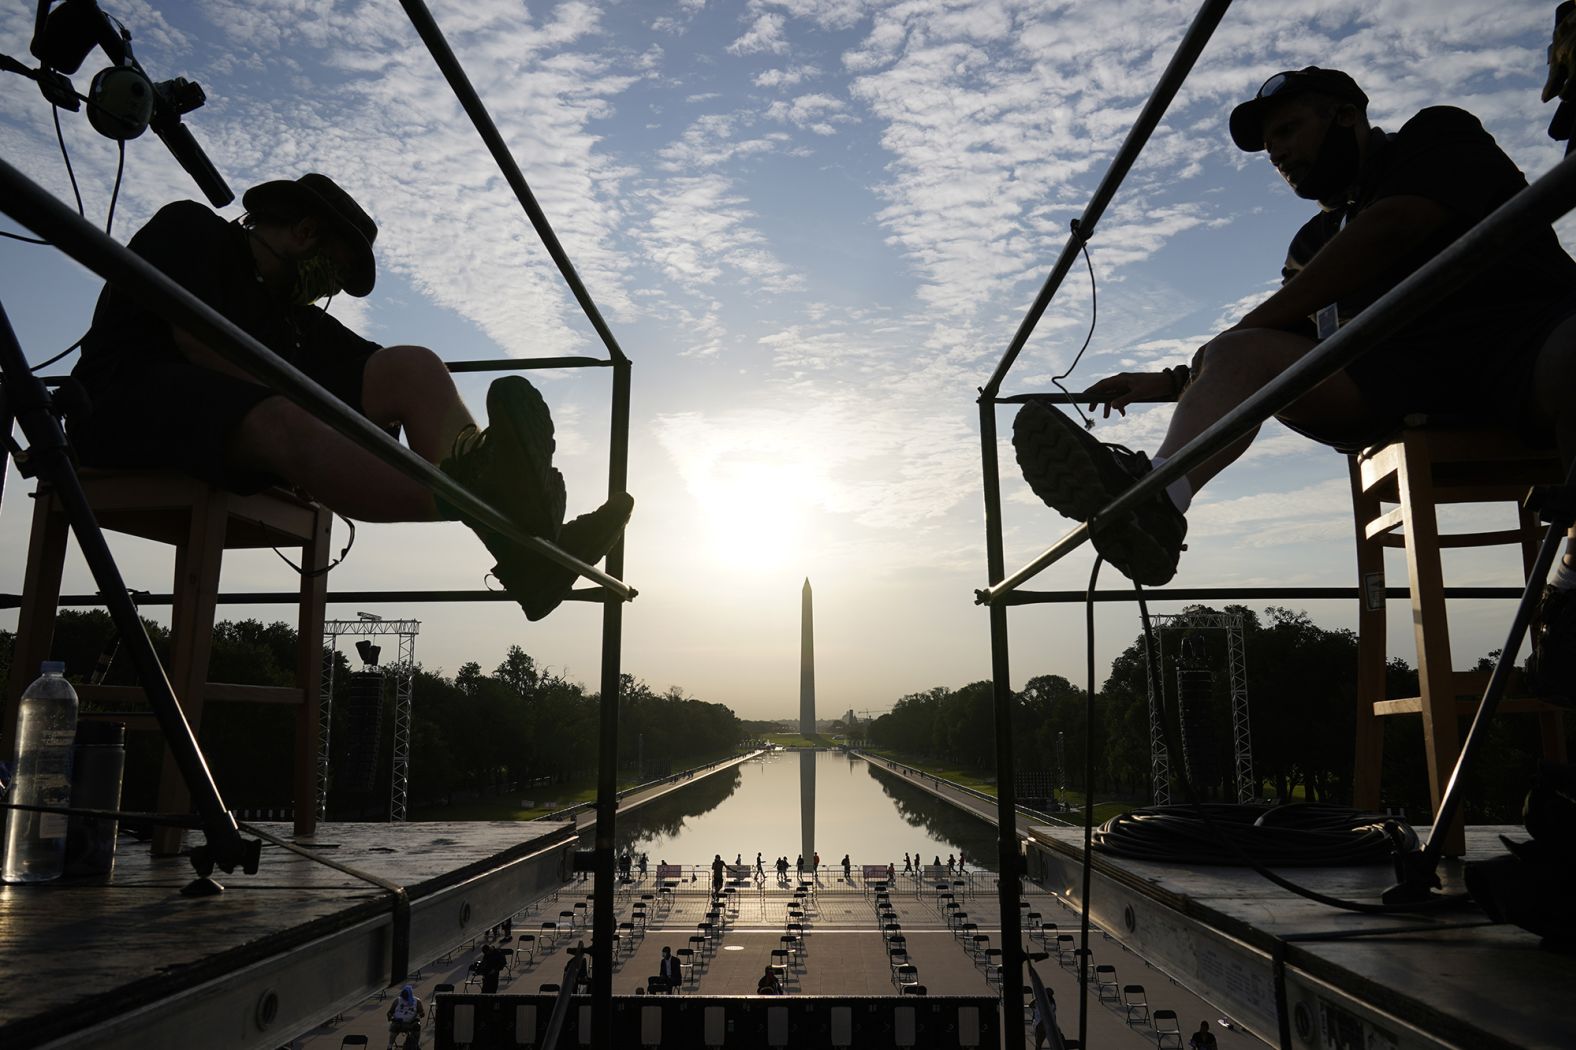 The early morning sun rises over the Washington Monument and the Lincoln Memorial's Reflecting Pool as final preparations are made for the March on Washington. 